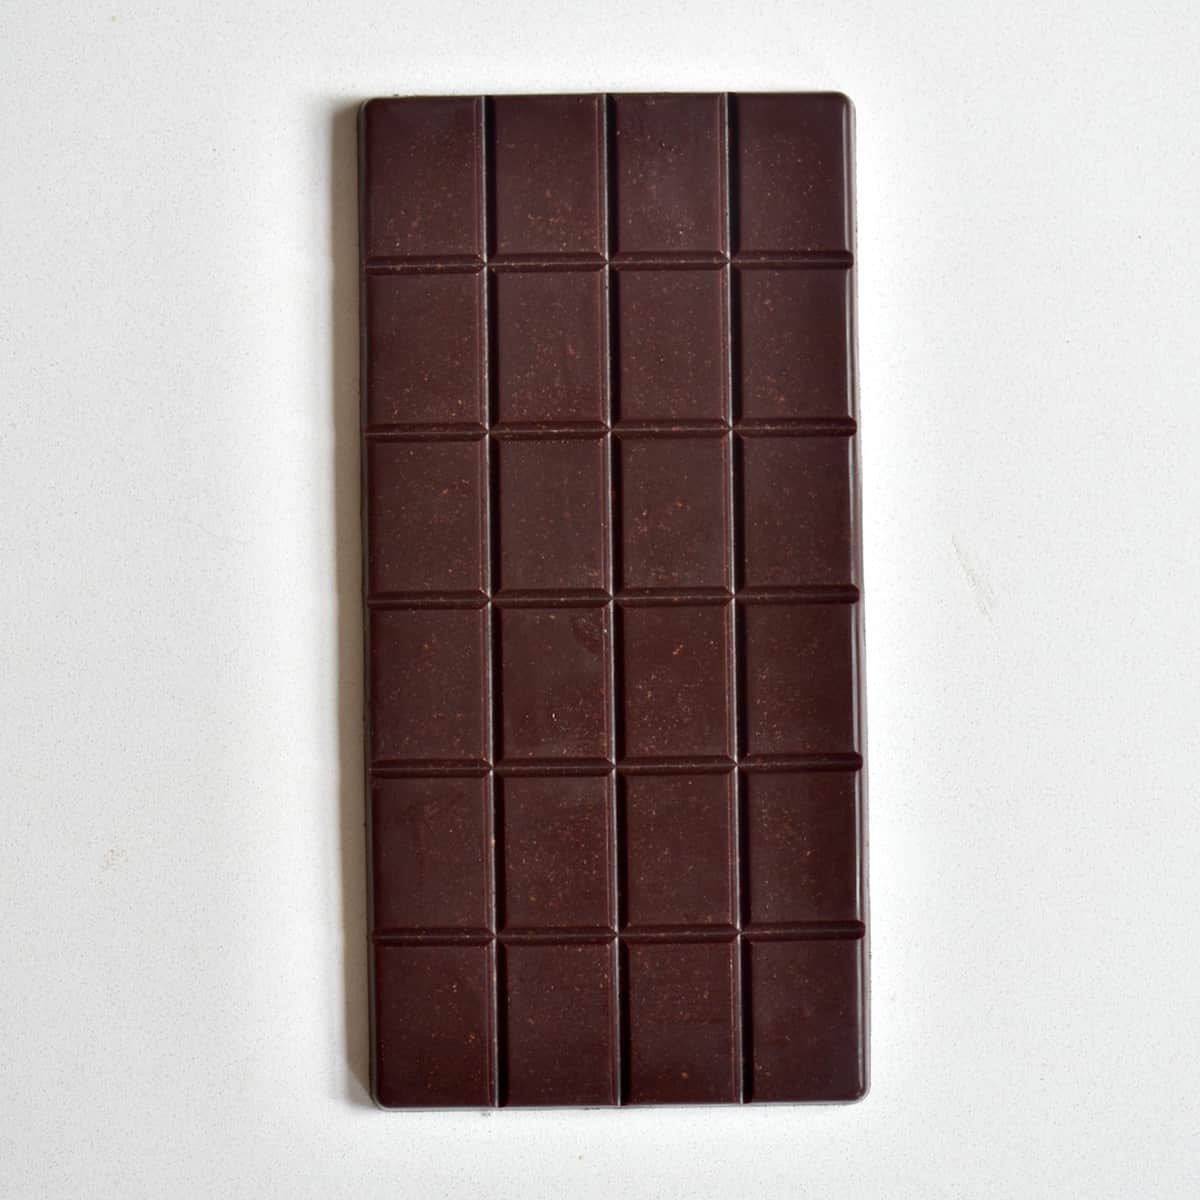 Chocolate Bar Molds - Silicone Break Apart Protein and Engery Bar Candy  Choco